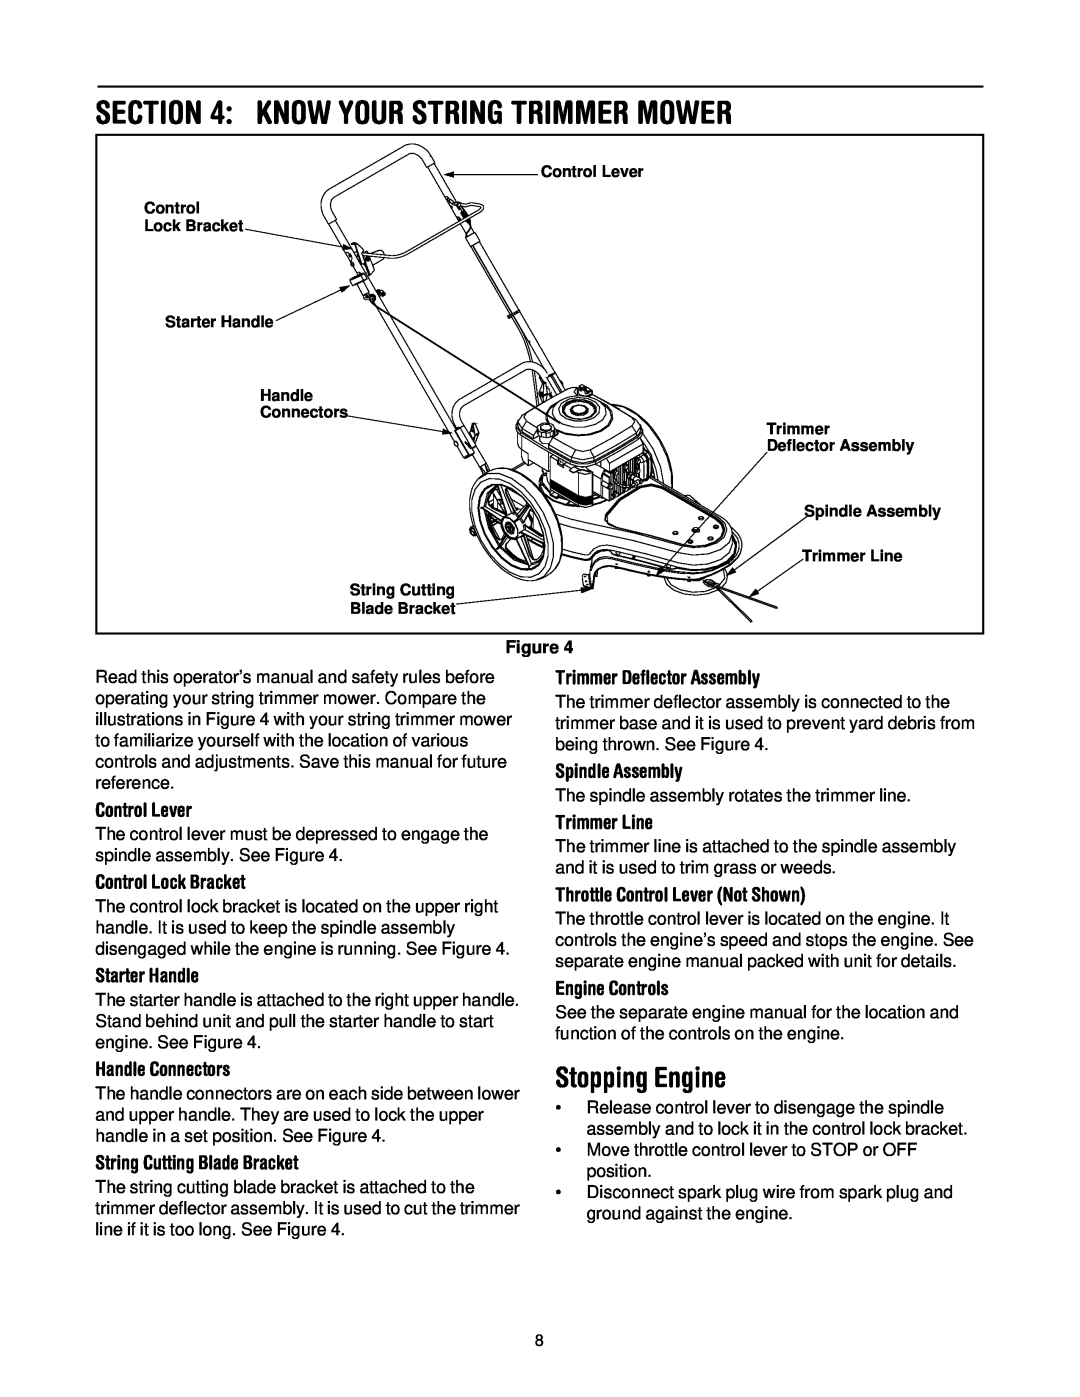 Troy-Bilt 258 manual Know Your String Trimmer Mower, Stopping Engine 